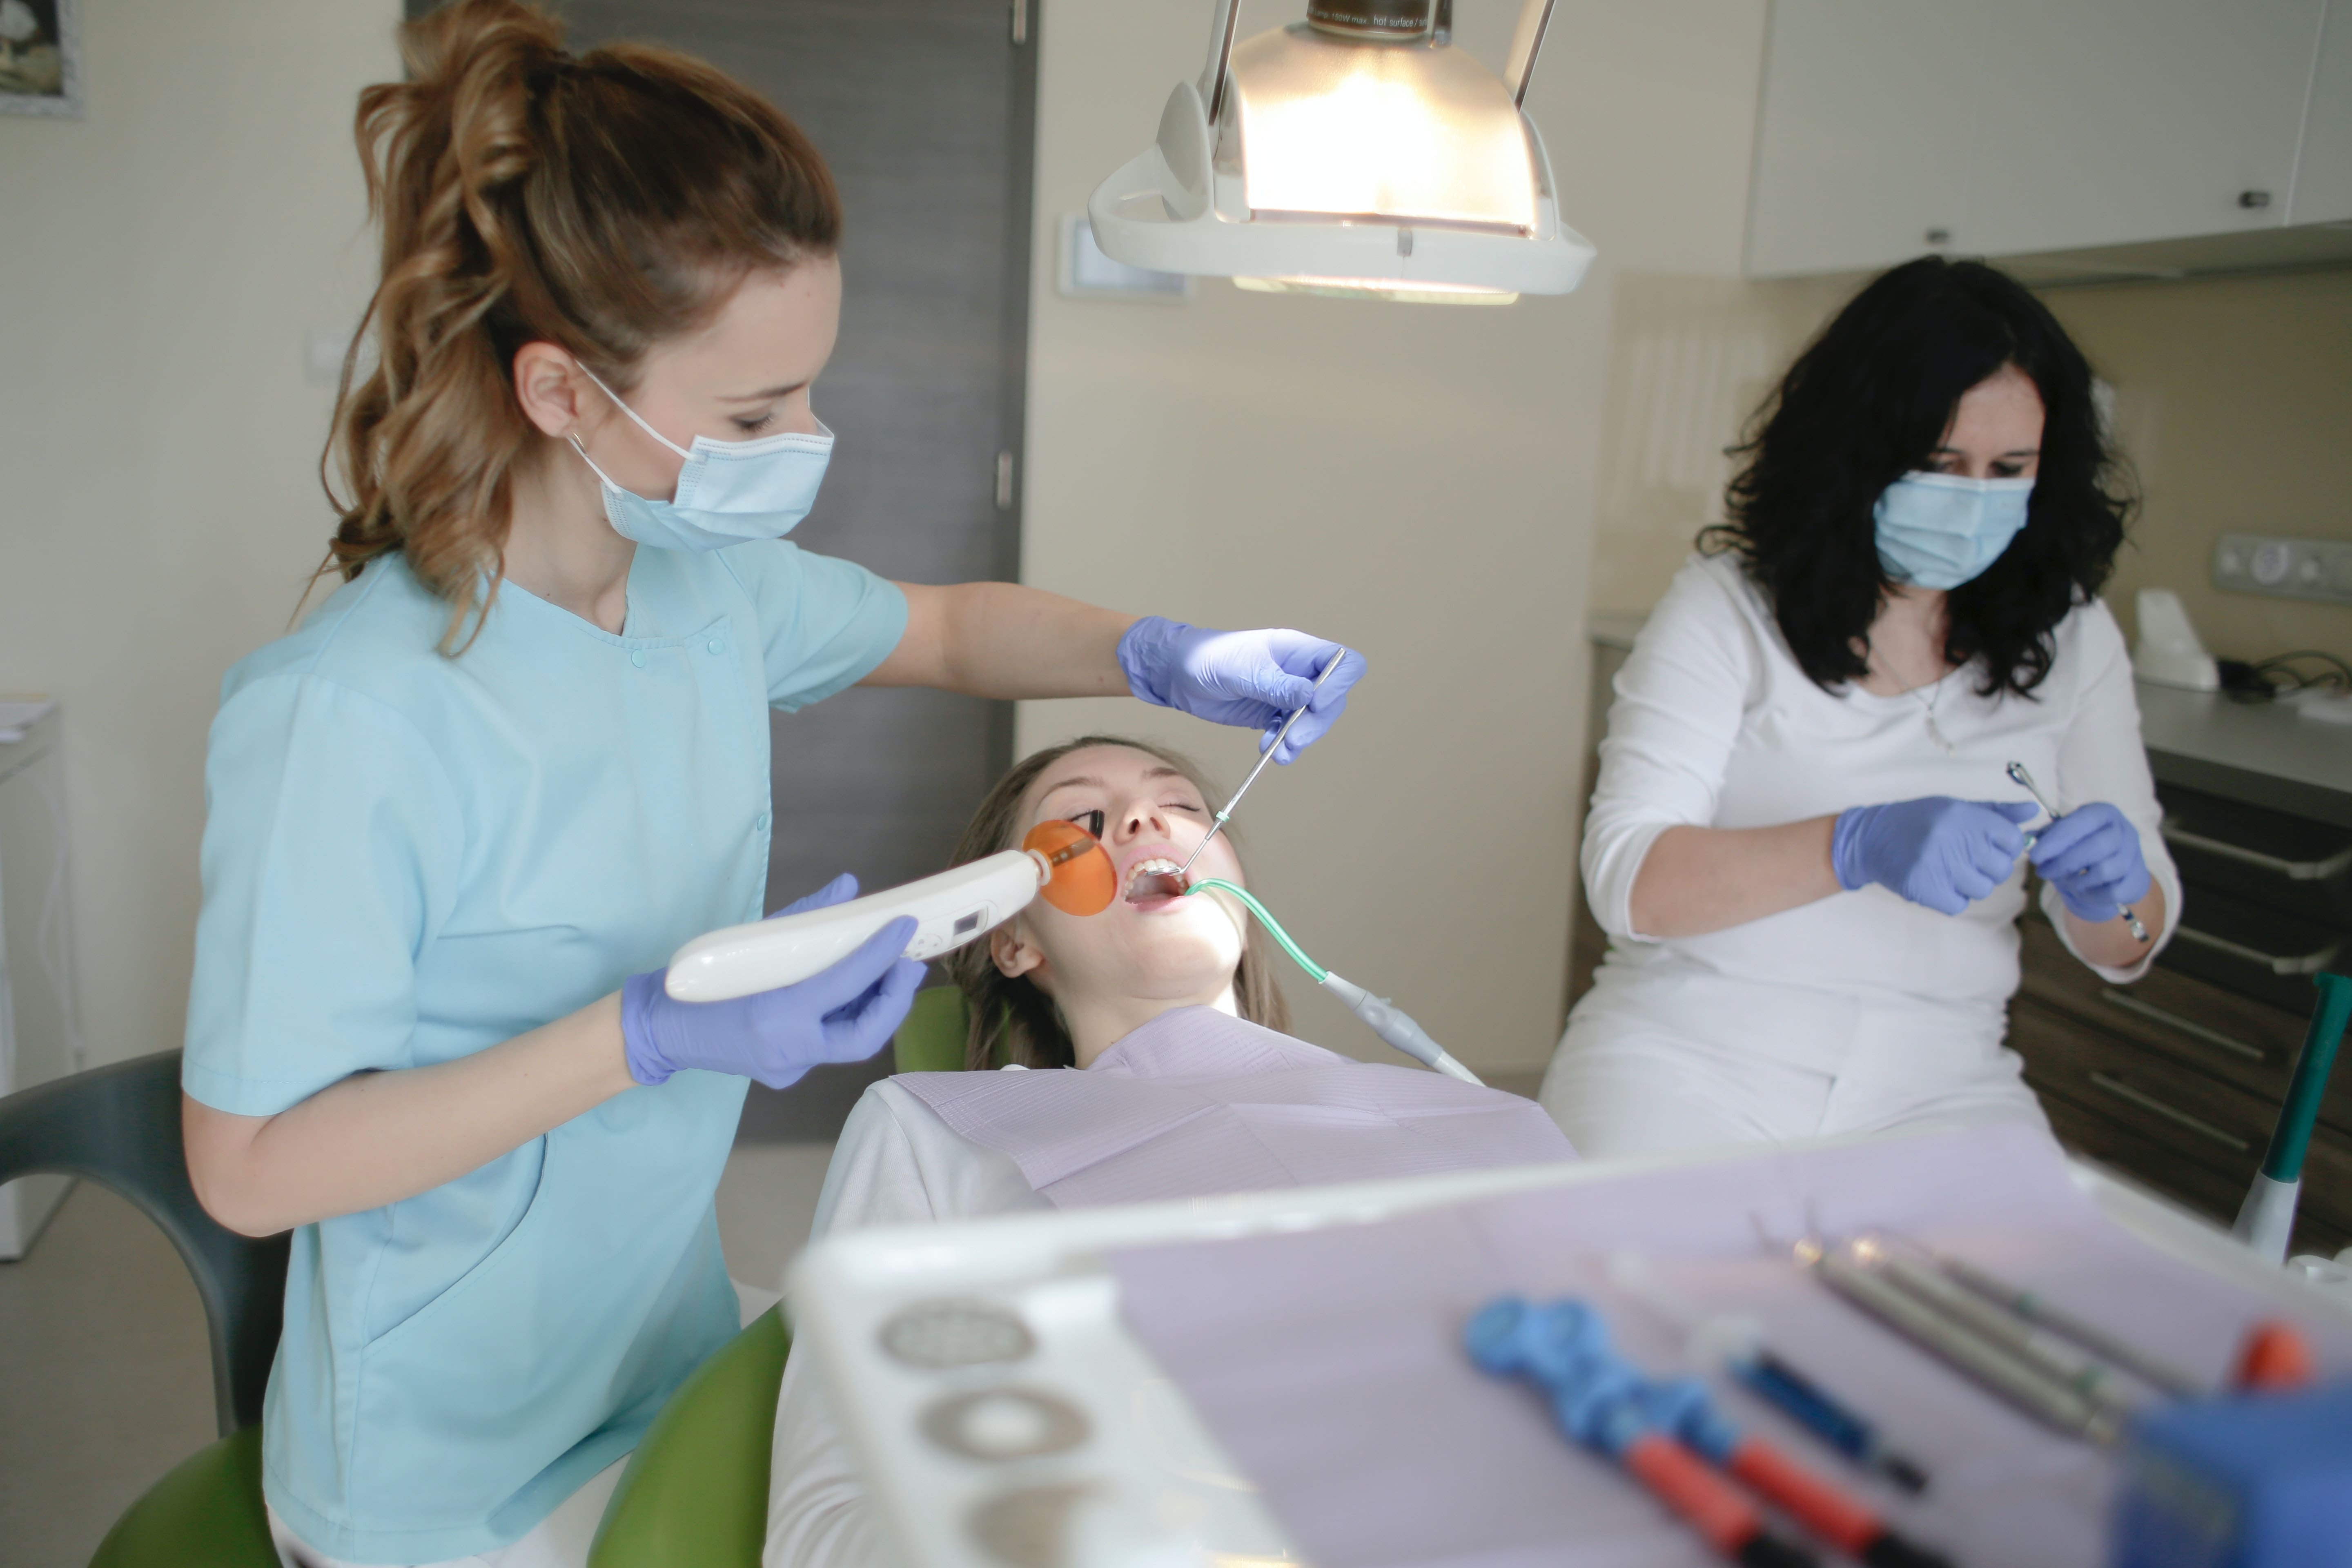 Facts About Dental Cleaning: How Long Does a Dental Cleaning Take?